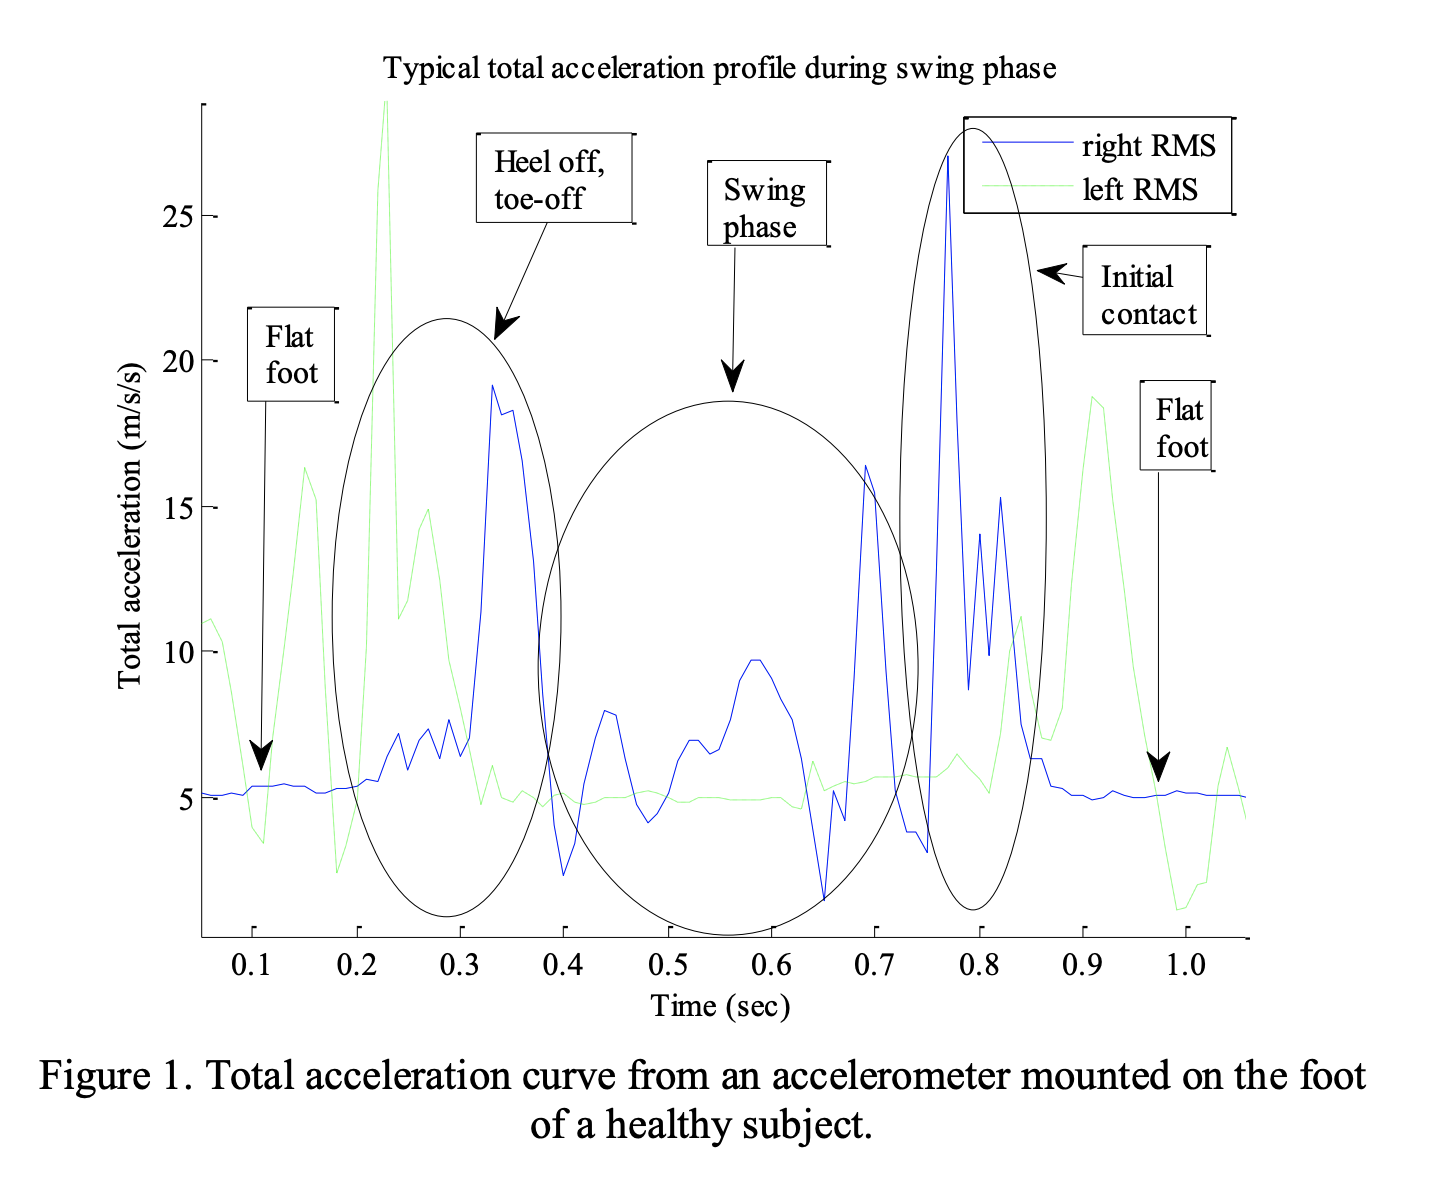 Patterson M., Caulfield B. A novel approach for assessing gait using foot mounted accelerometers; Proceedings of 5th International ICST Conference on Pervasive Computing Technologies for Healthcare; Dublin, Ireland. 23–26 May 2011; pp. 218–221.